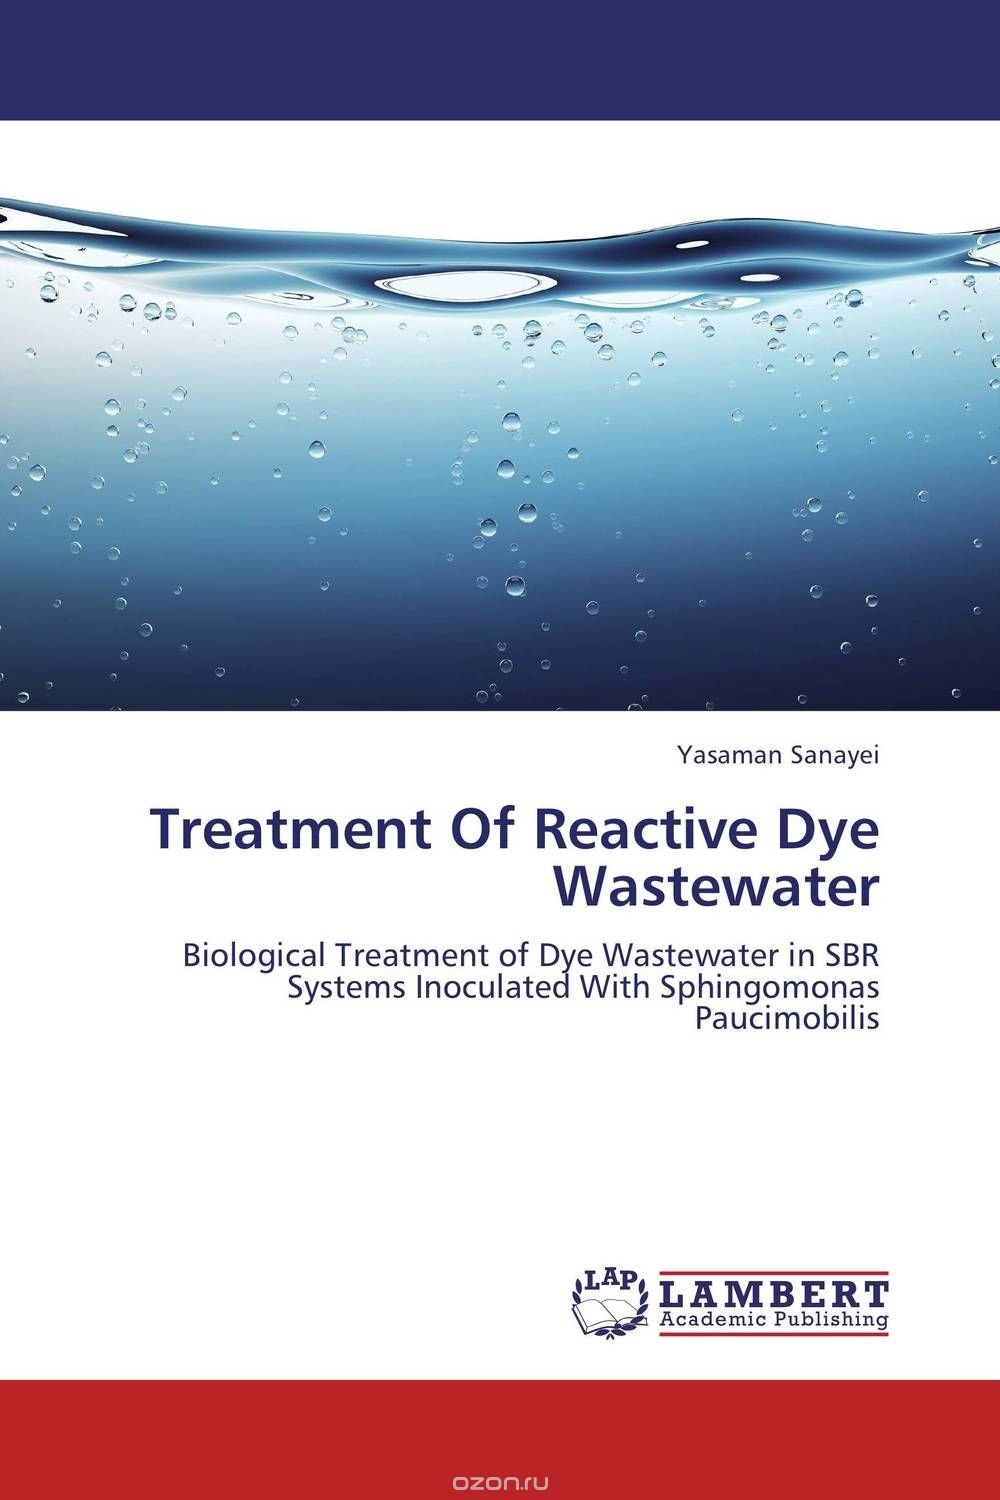 Treatment Of Reactive Dye Wastewater